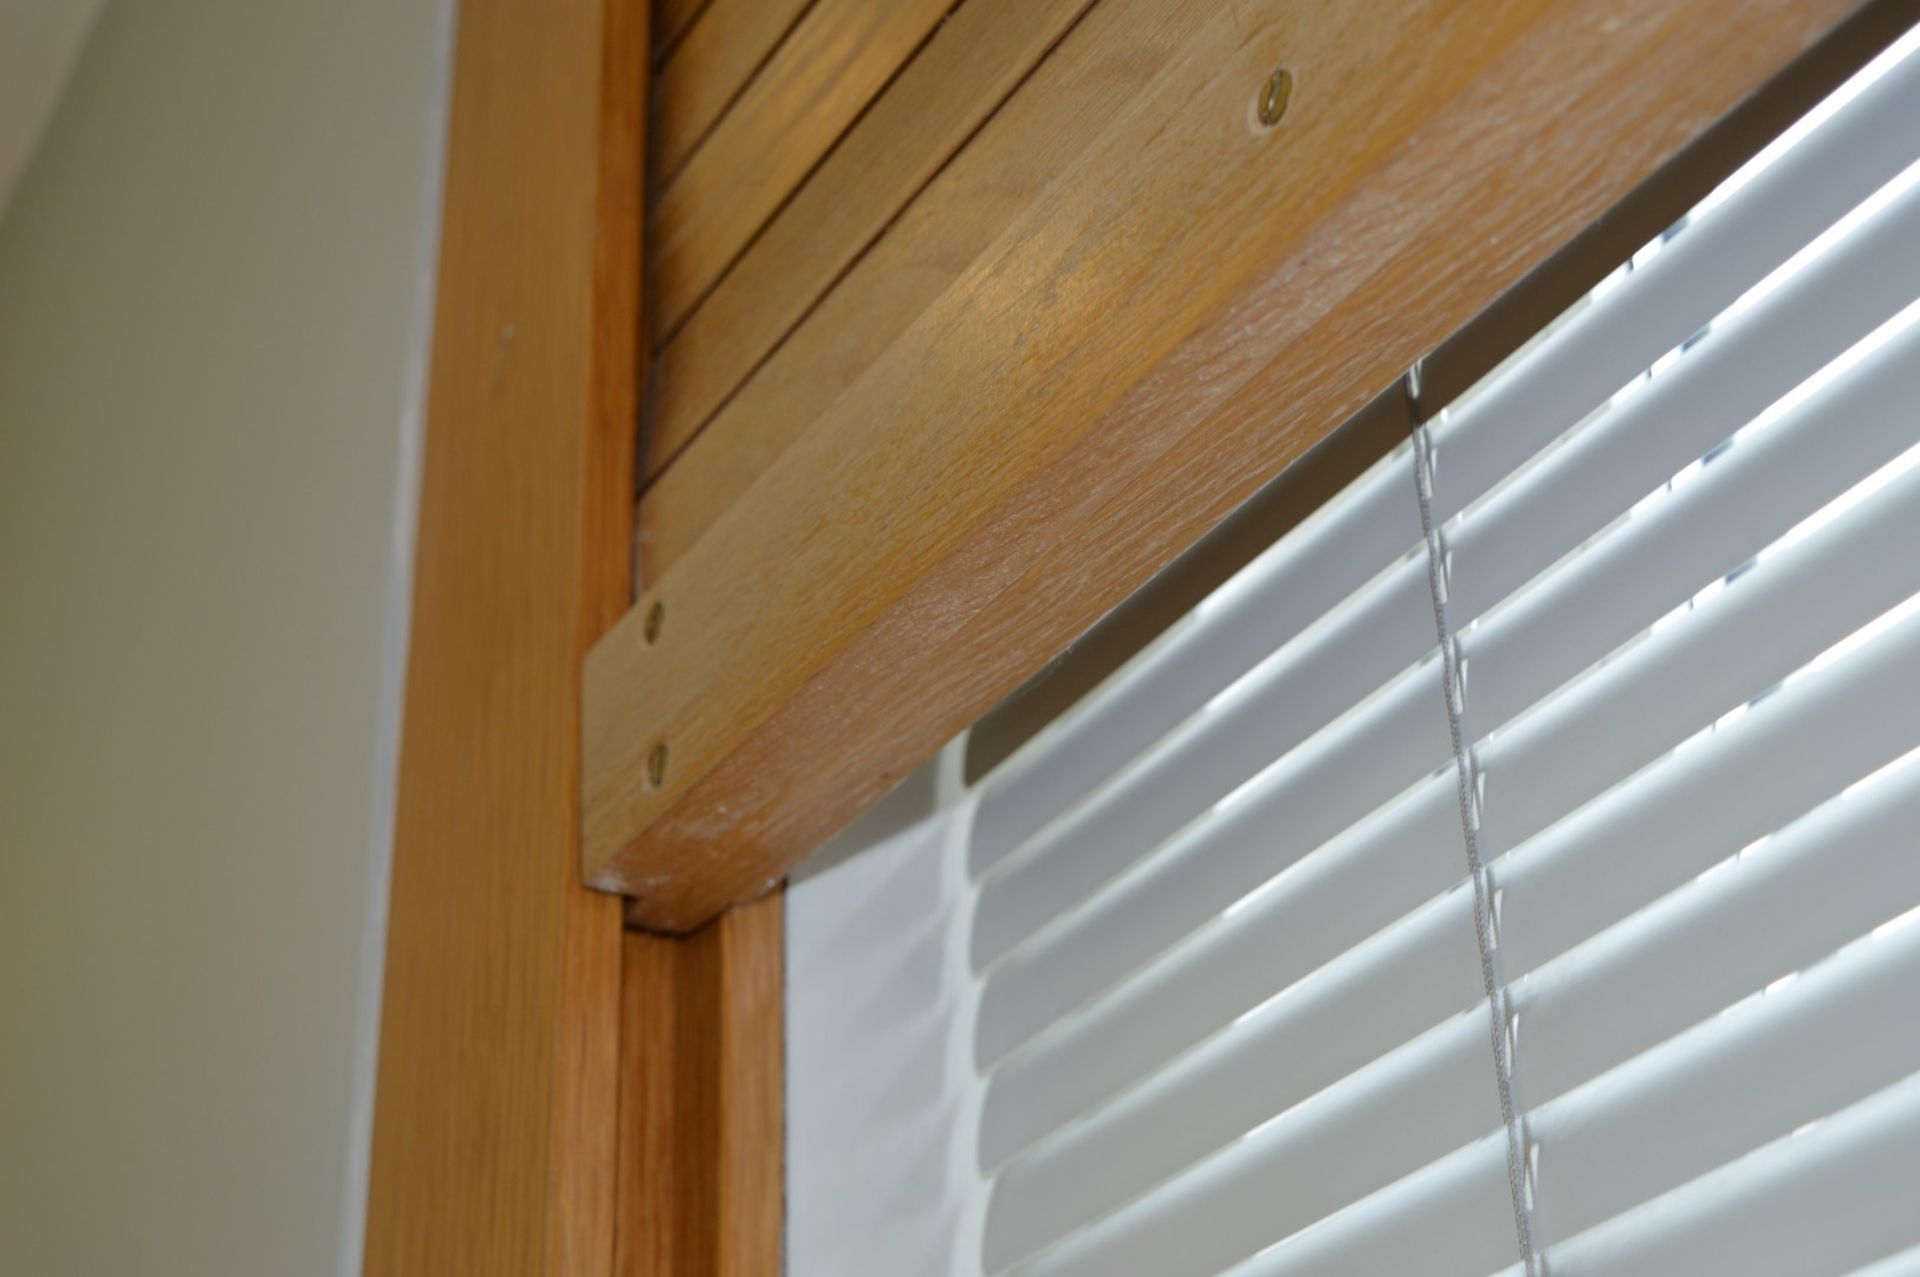 1 x Roller Shutter Window Shade With Electric Motor - Ref 58 - Solid Wooden Slat Design - CL230 - - Image 7 of 10